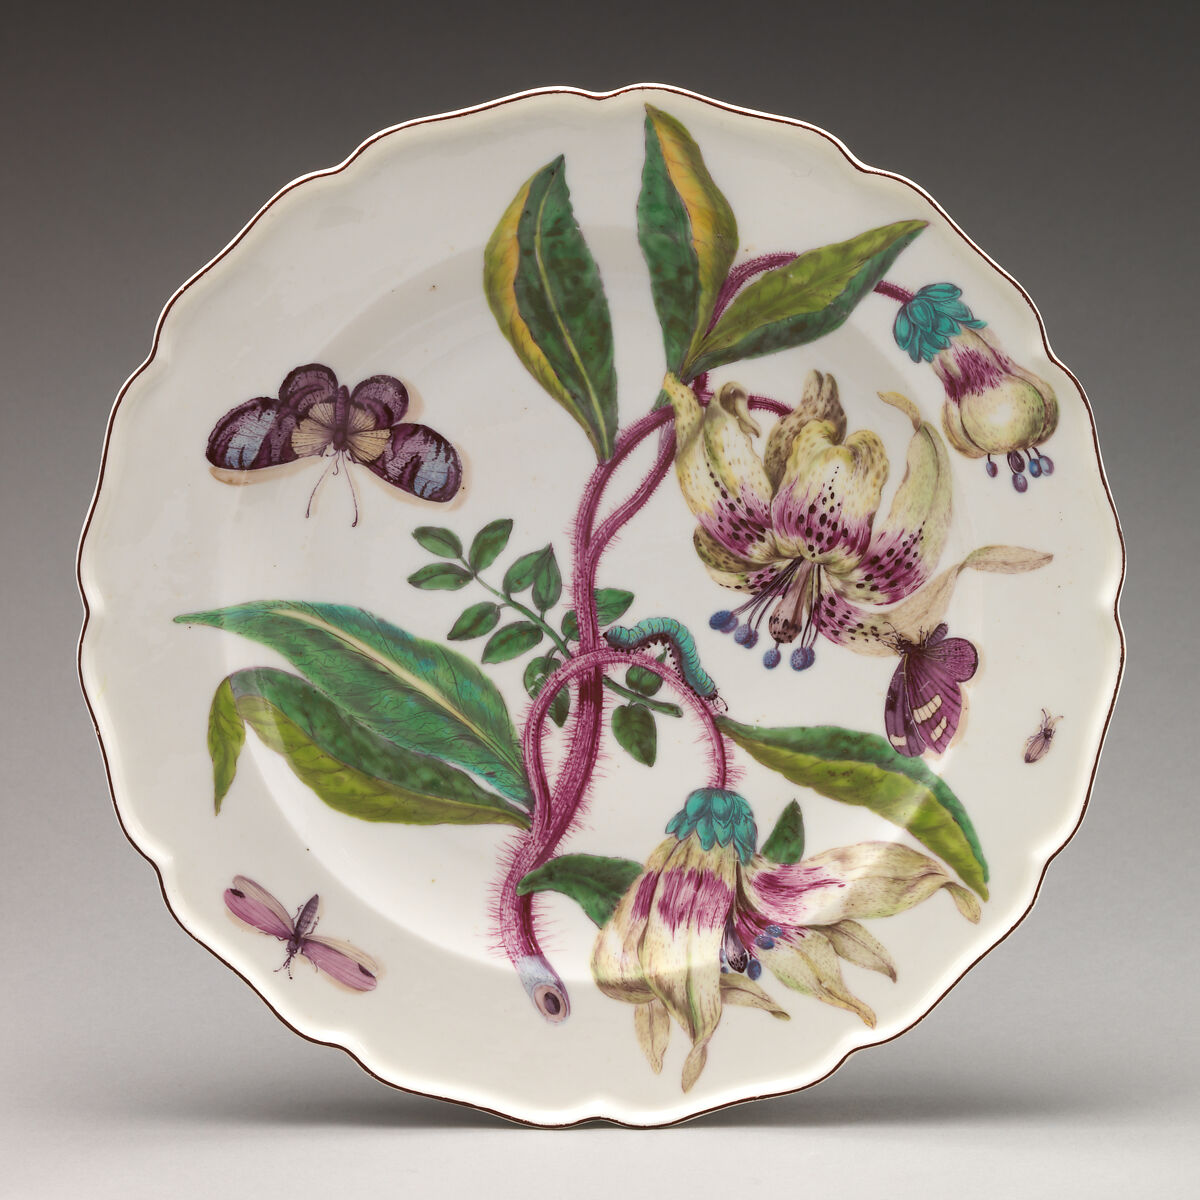 Botanical plate with spray of lilies, Chelsea Porcelain Manufactory (British, 1745–1784, Red Anchor Period, ca. 1753–58), Soft-paste porcelain with enamel decoration, British, Chelsea 